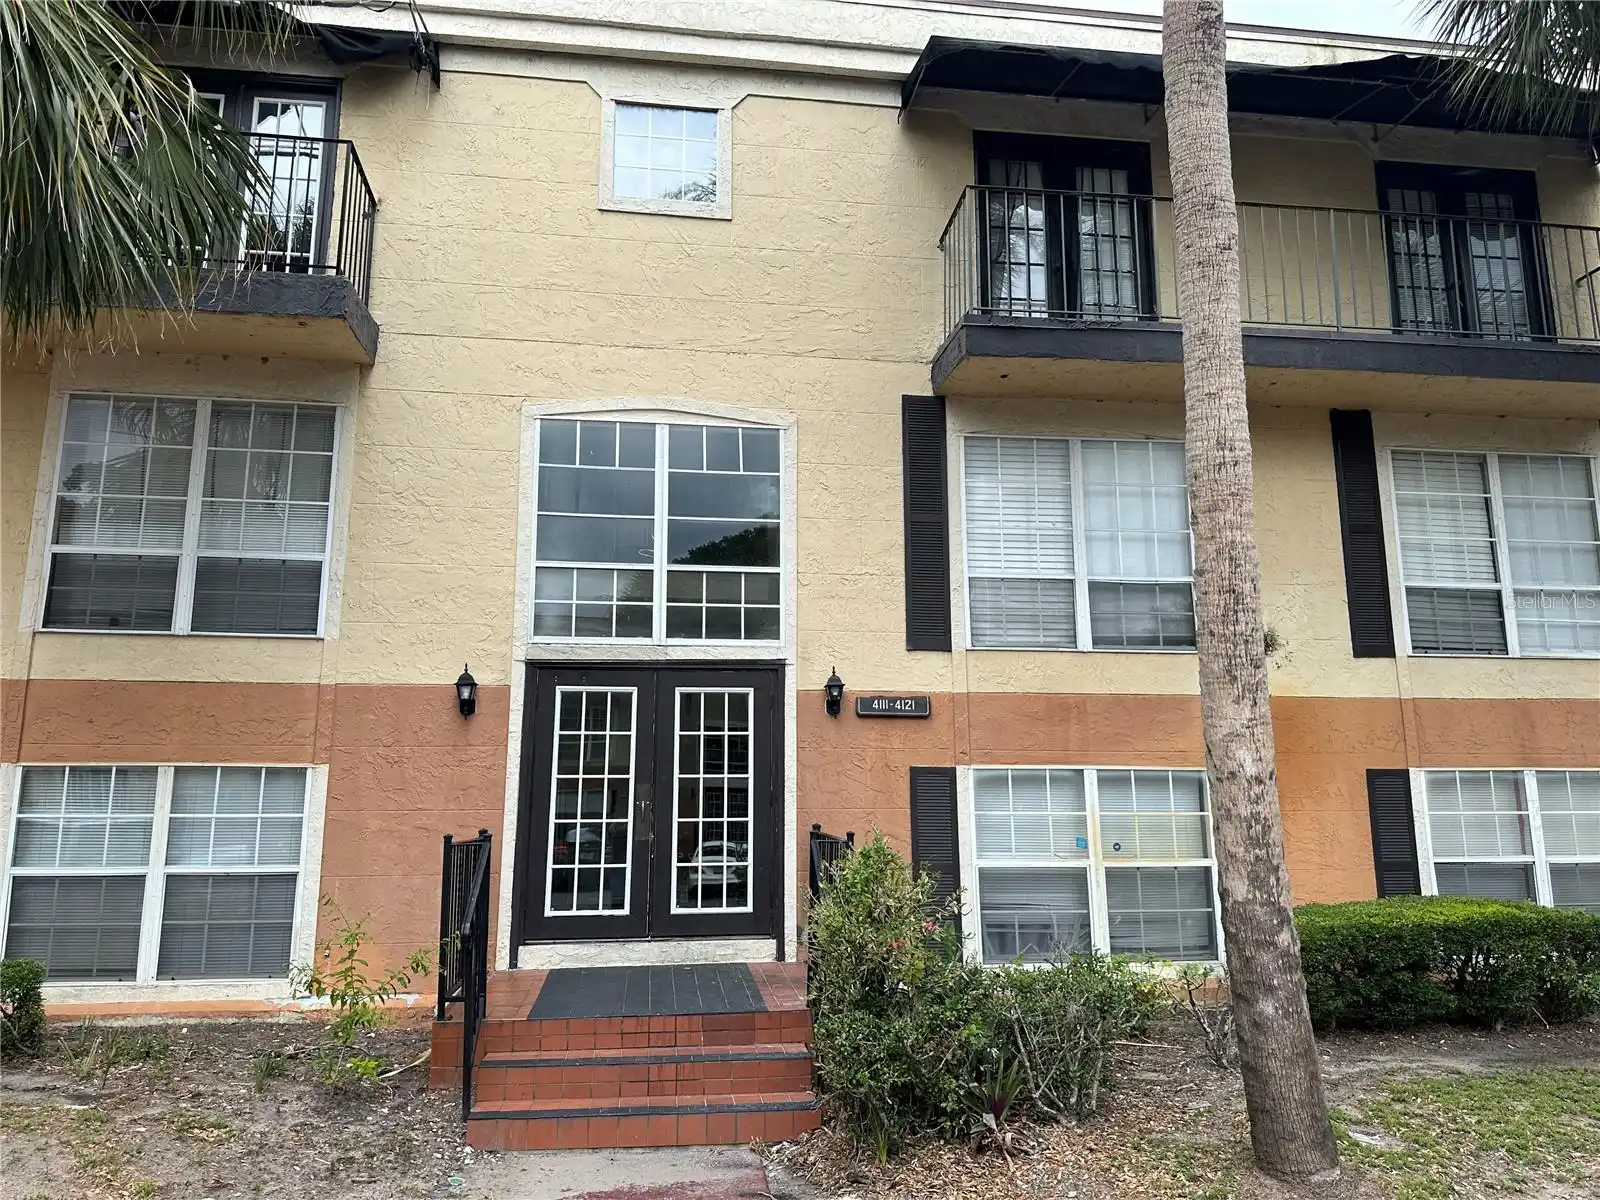 3BR, Residential Lease, 2BA, $1,750
Read More